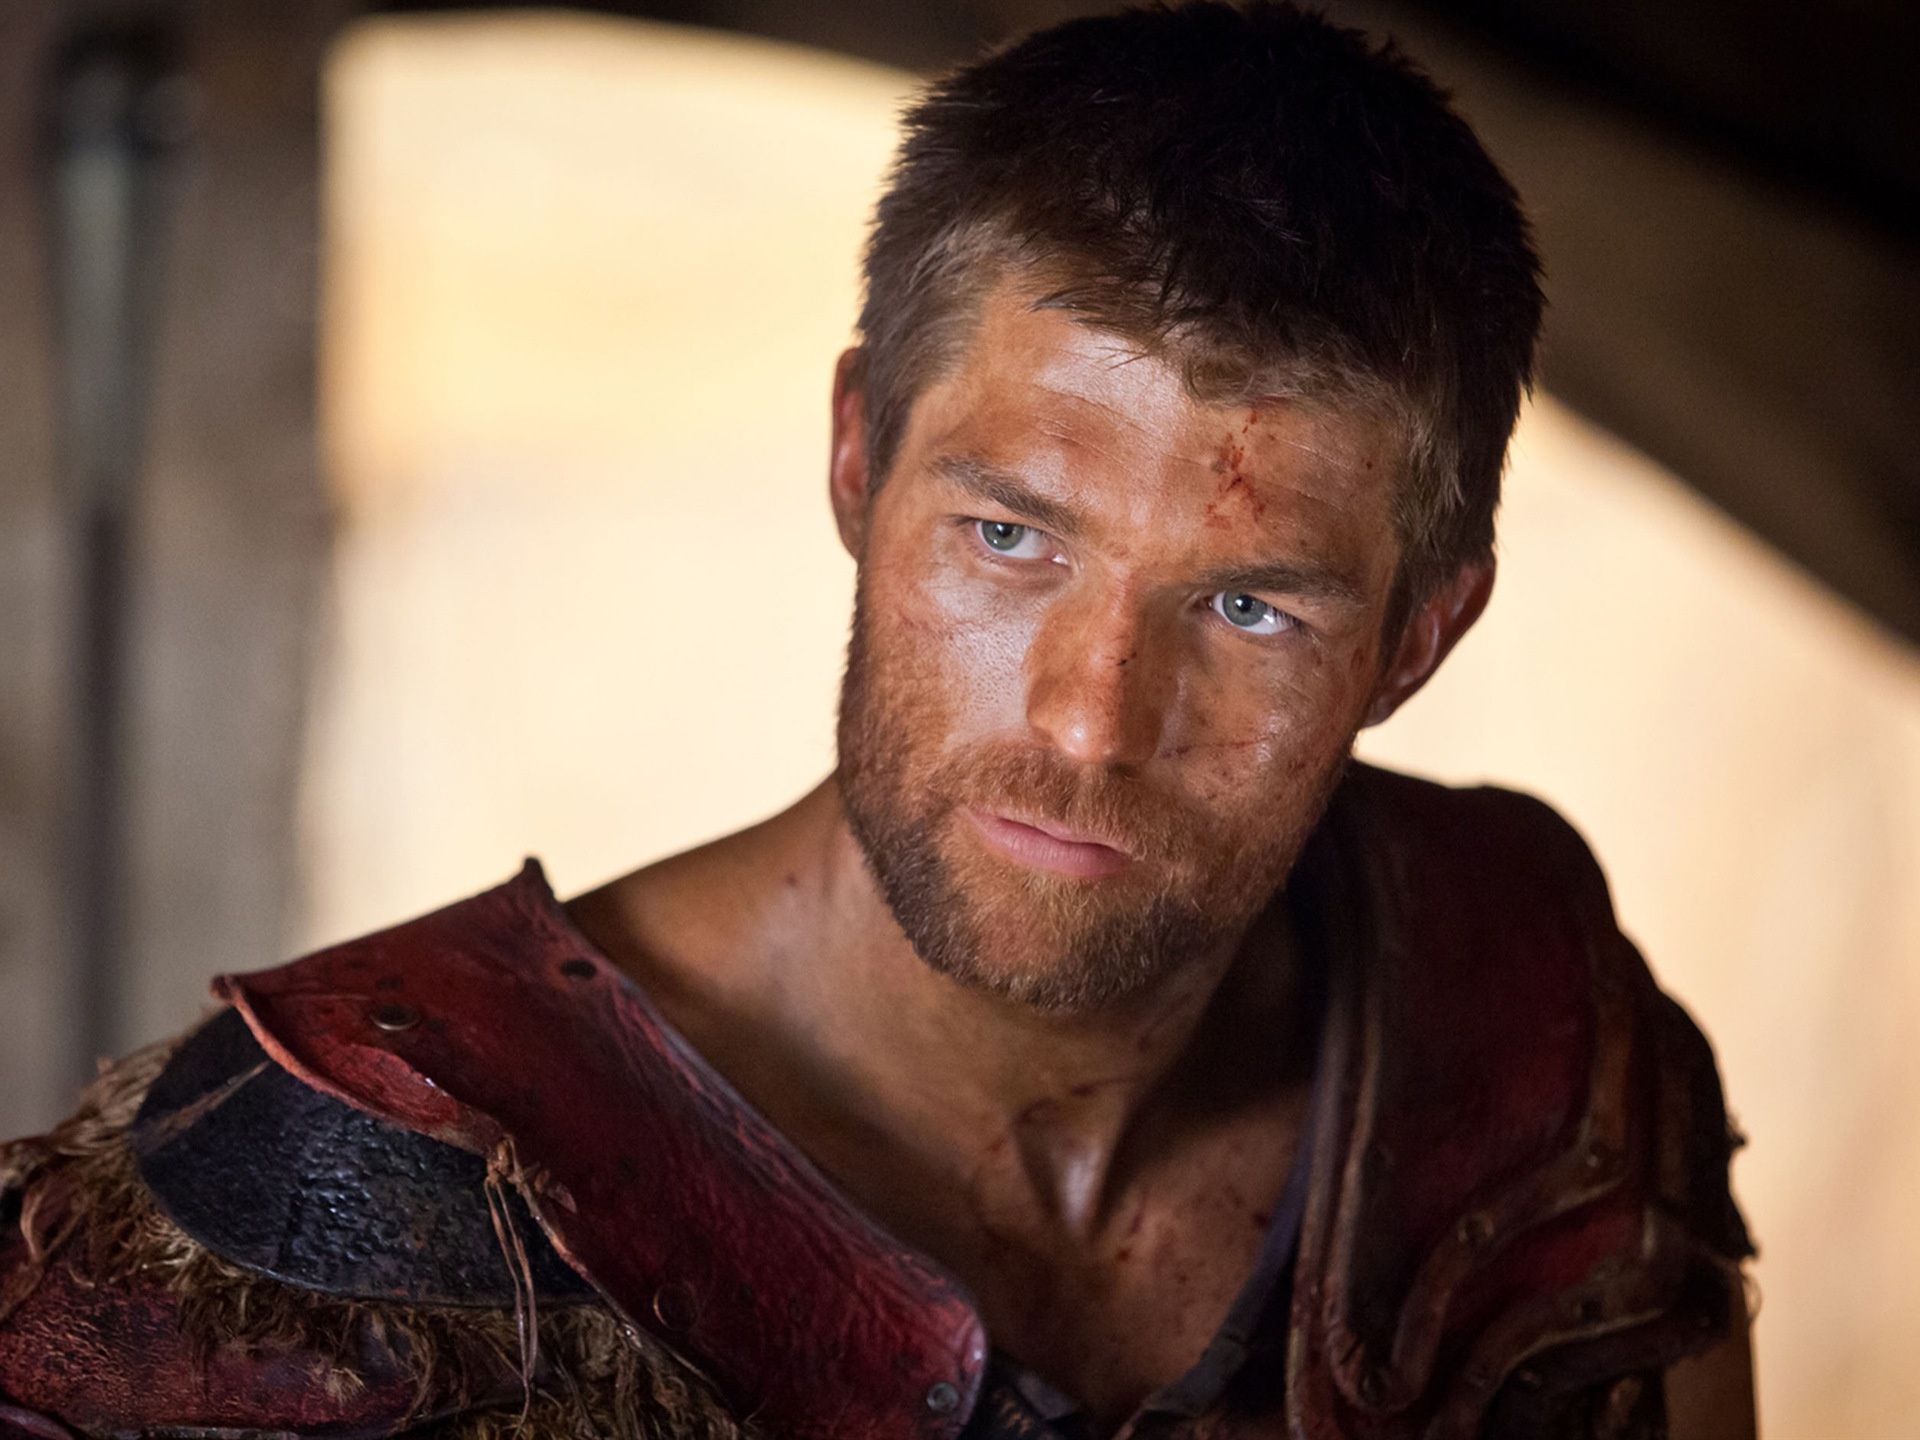 Spartacus: War of the Damned HD wallpapers #11 - 1920x1440